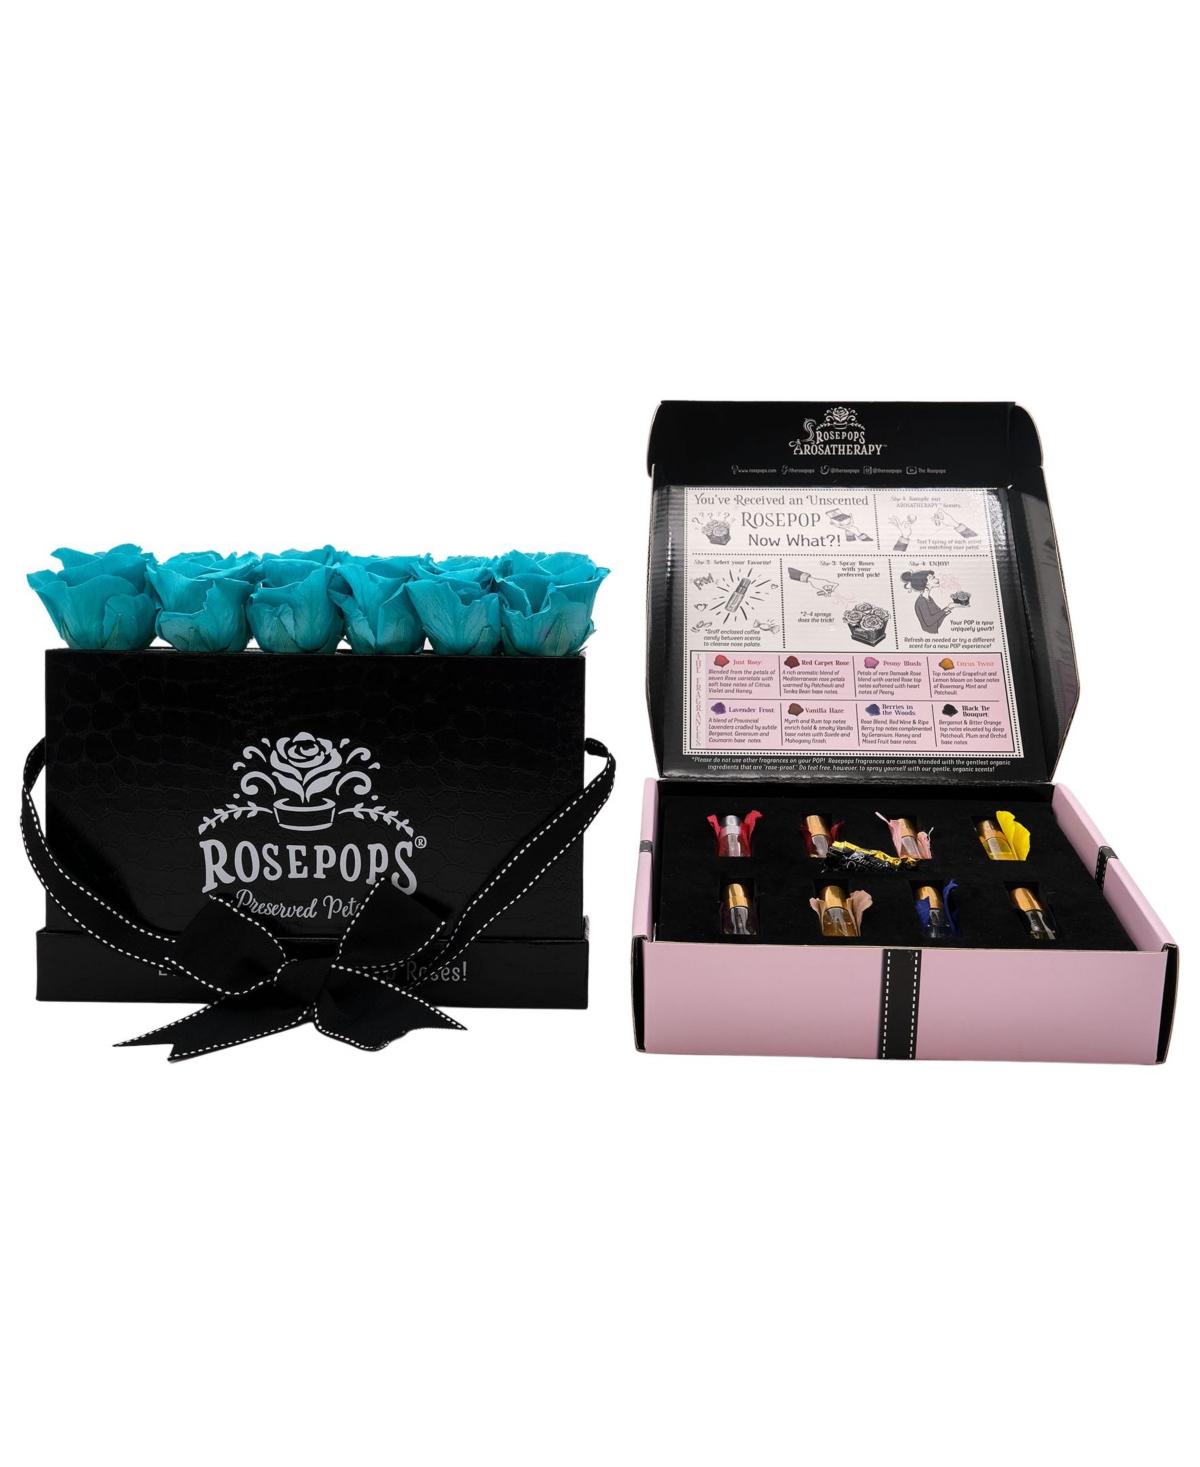 Pop-Up Box of 6 Unscented Blue Topaz Real Roses with a Sampler Set of all Arosatherapy Fragrances with which to Scent the Roses